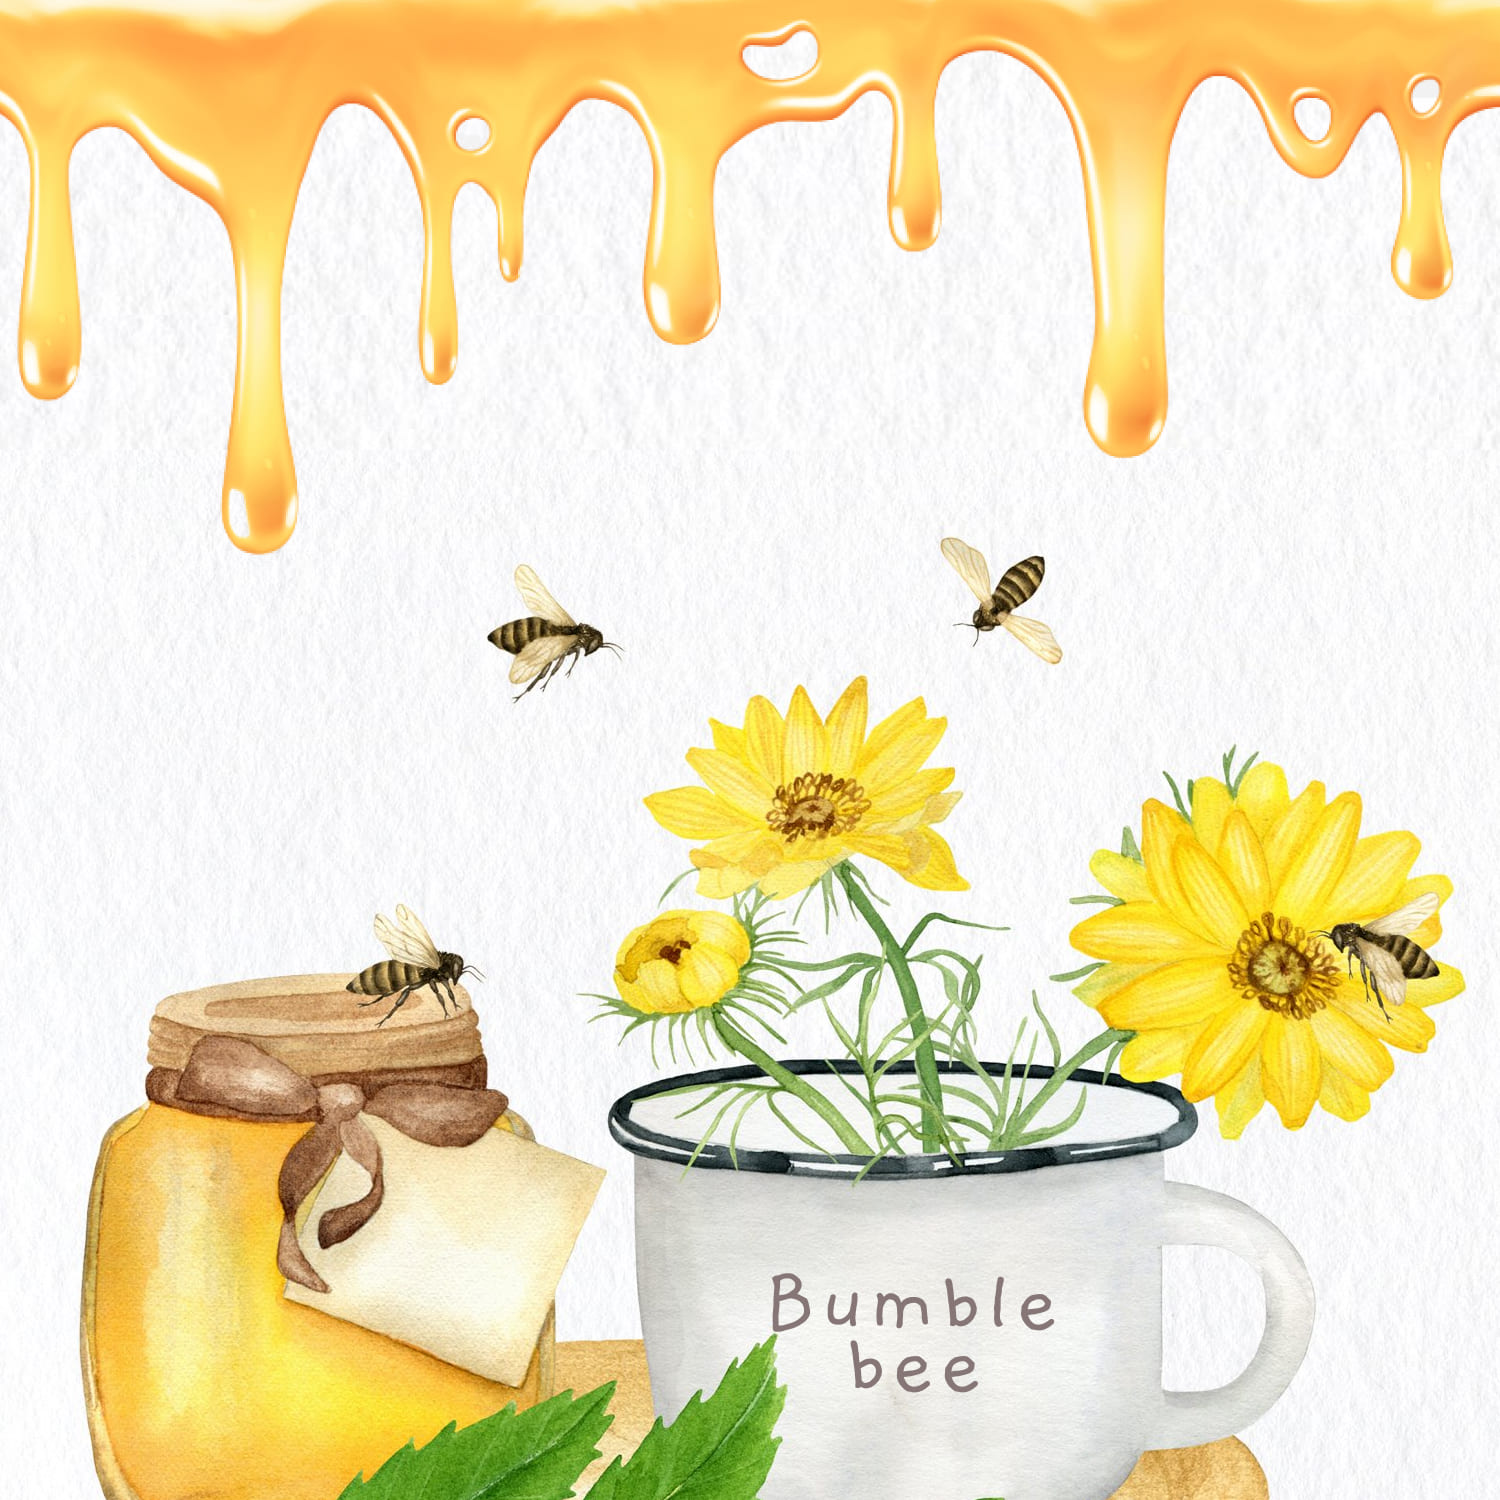 Bumble Bee Clipart Png Insect Honey - Preview Image.